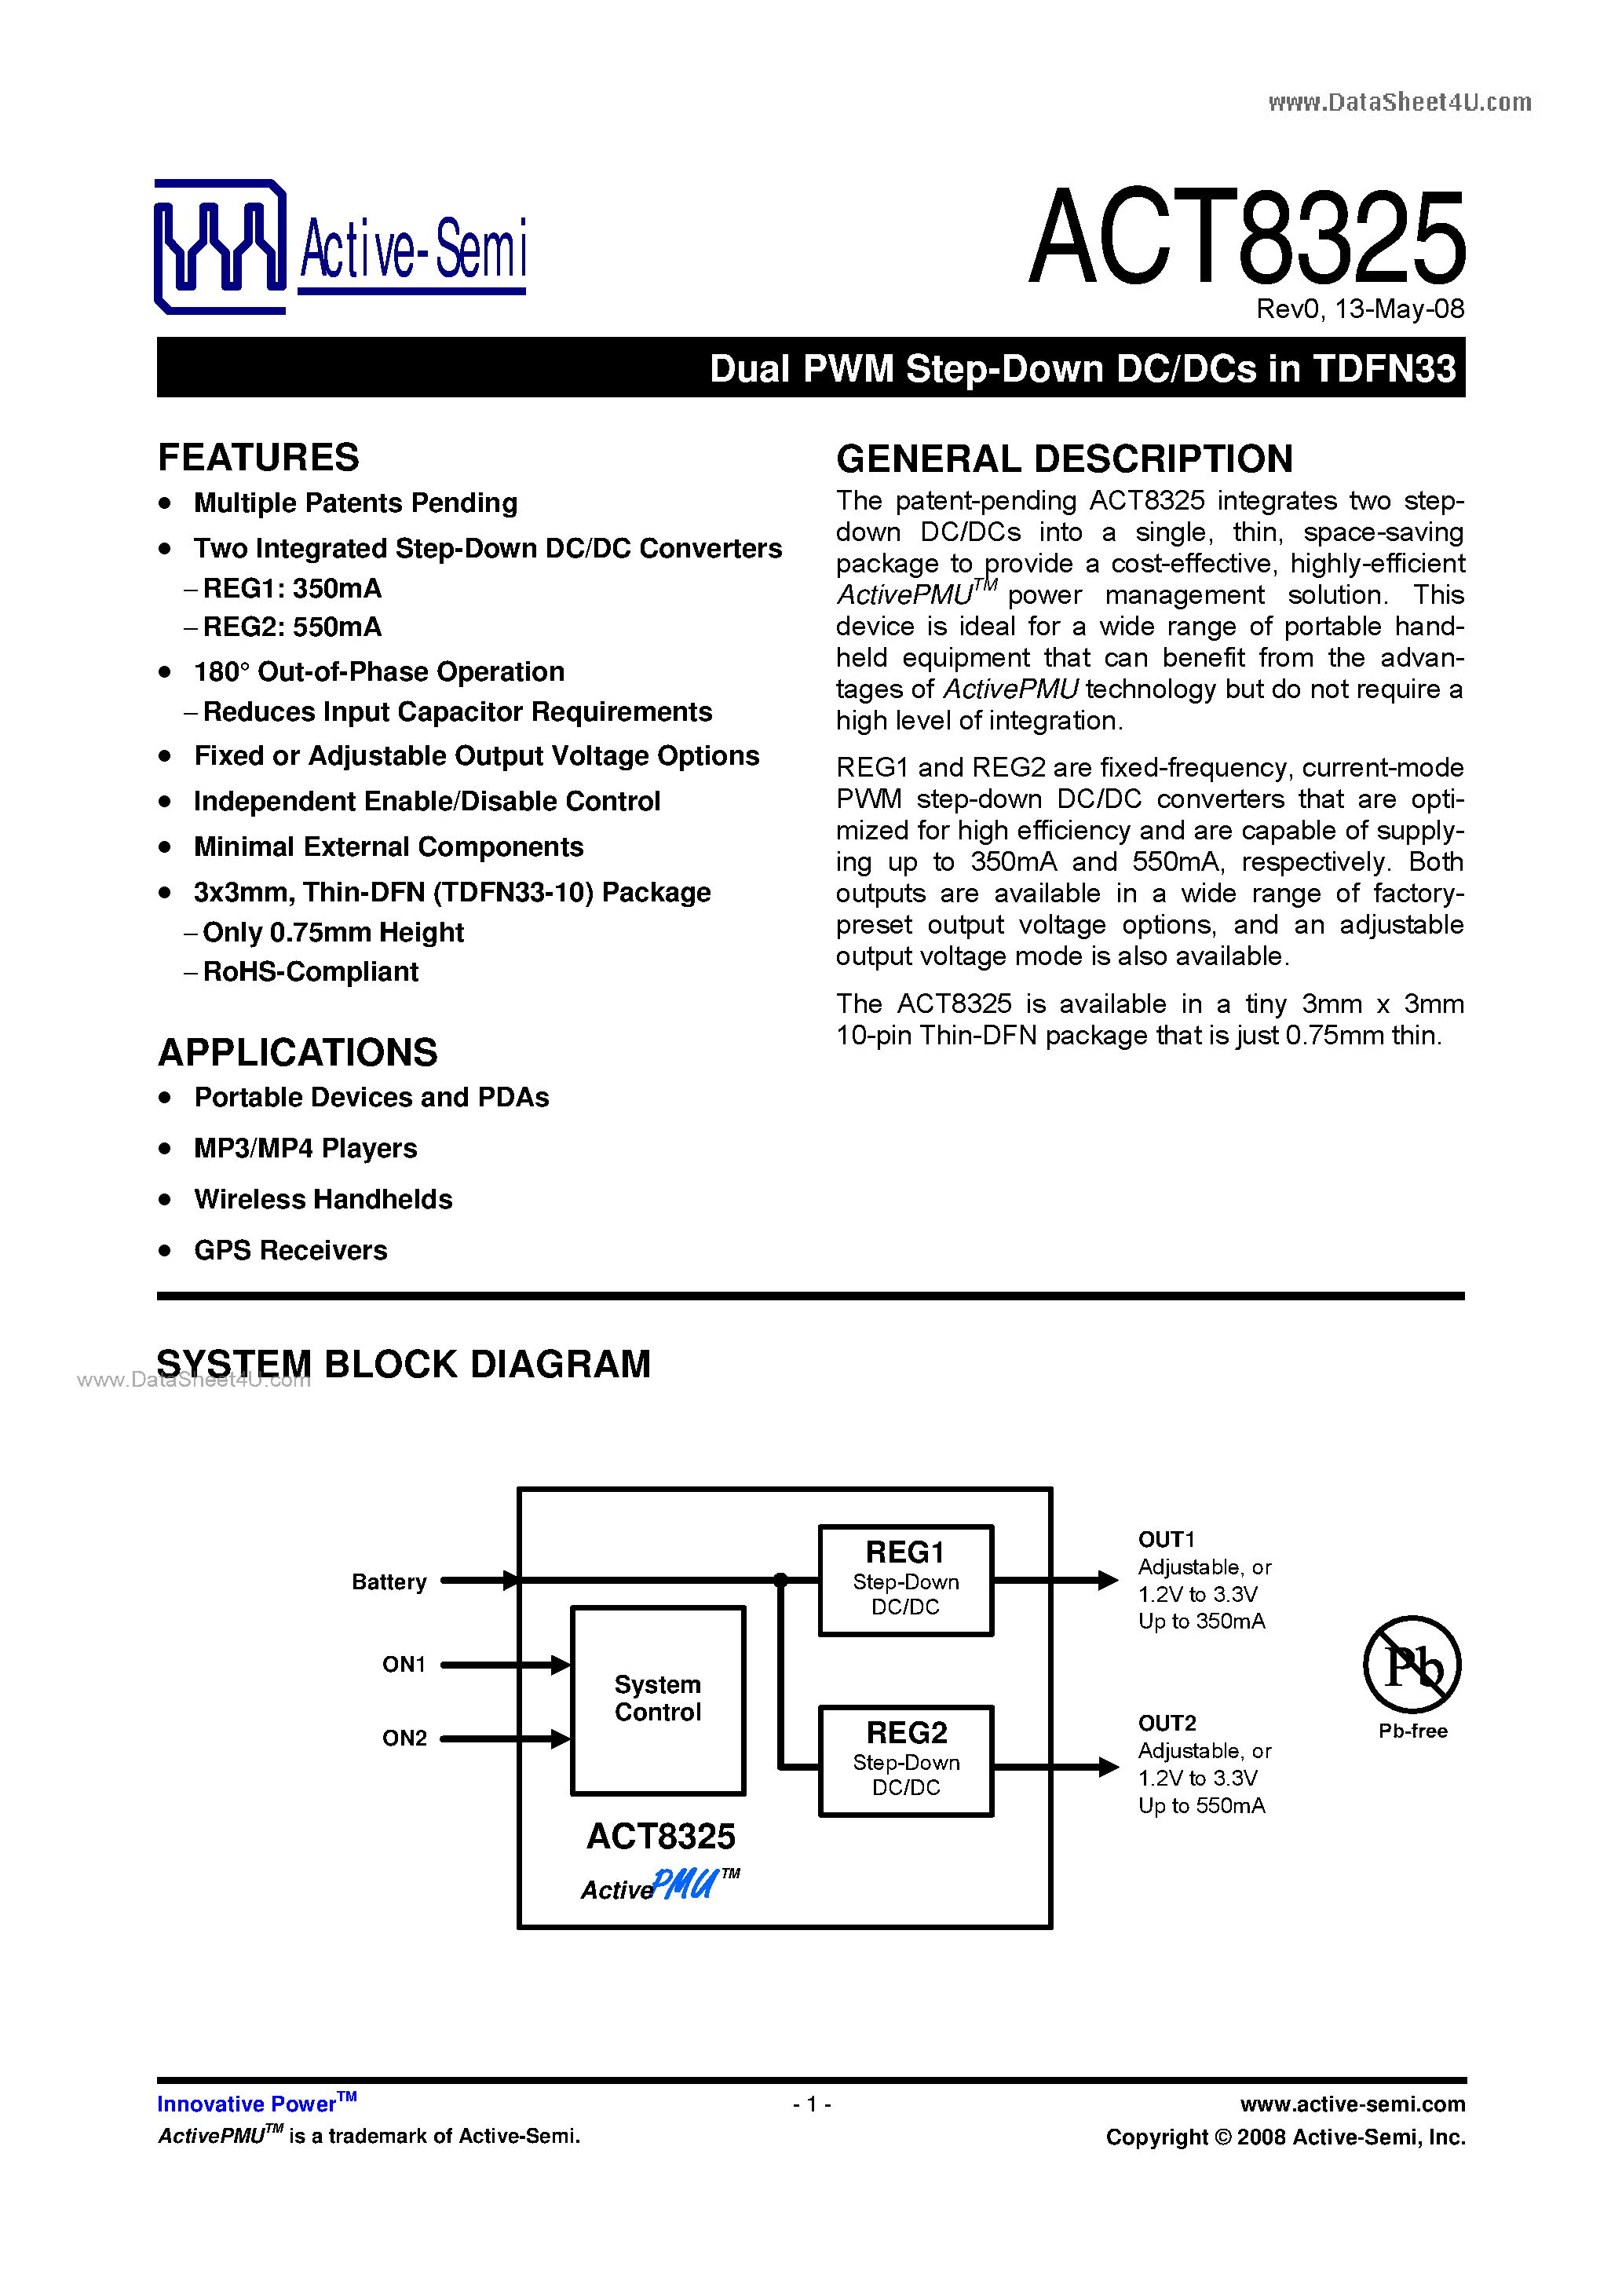 Datasheet ACT8325 - Dual PWM Step-Down DC/DCs in TDFN33 page 1